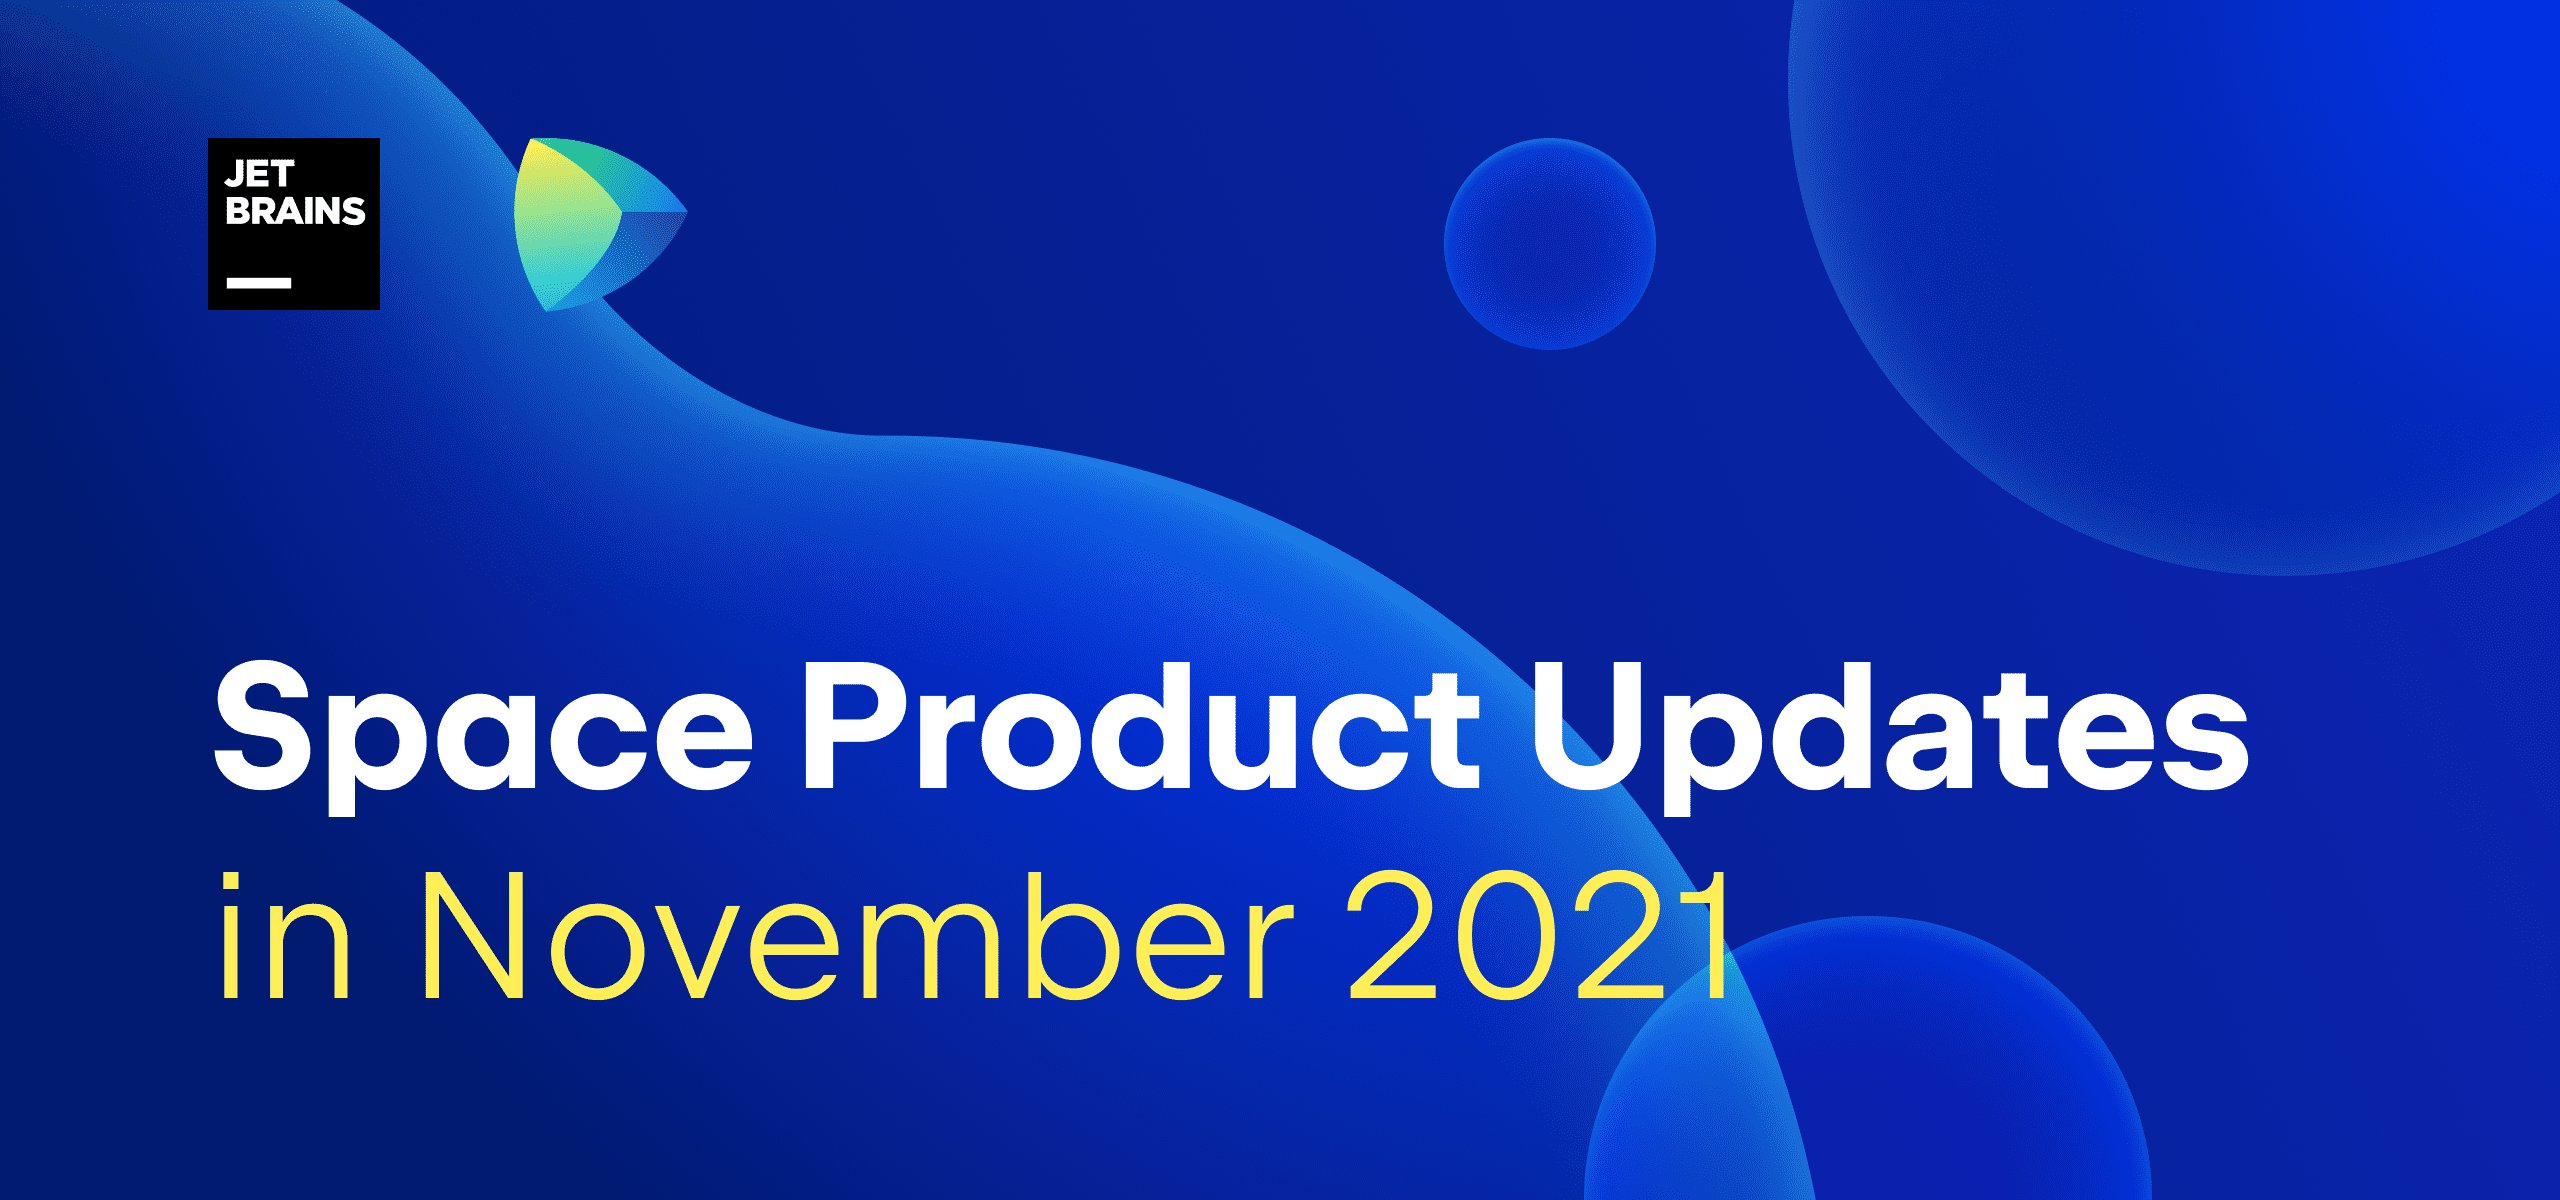 Space Product Updates in November 2021